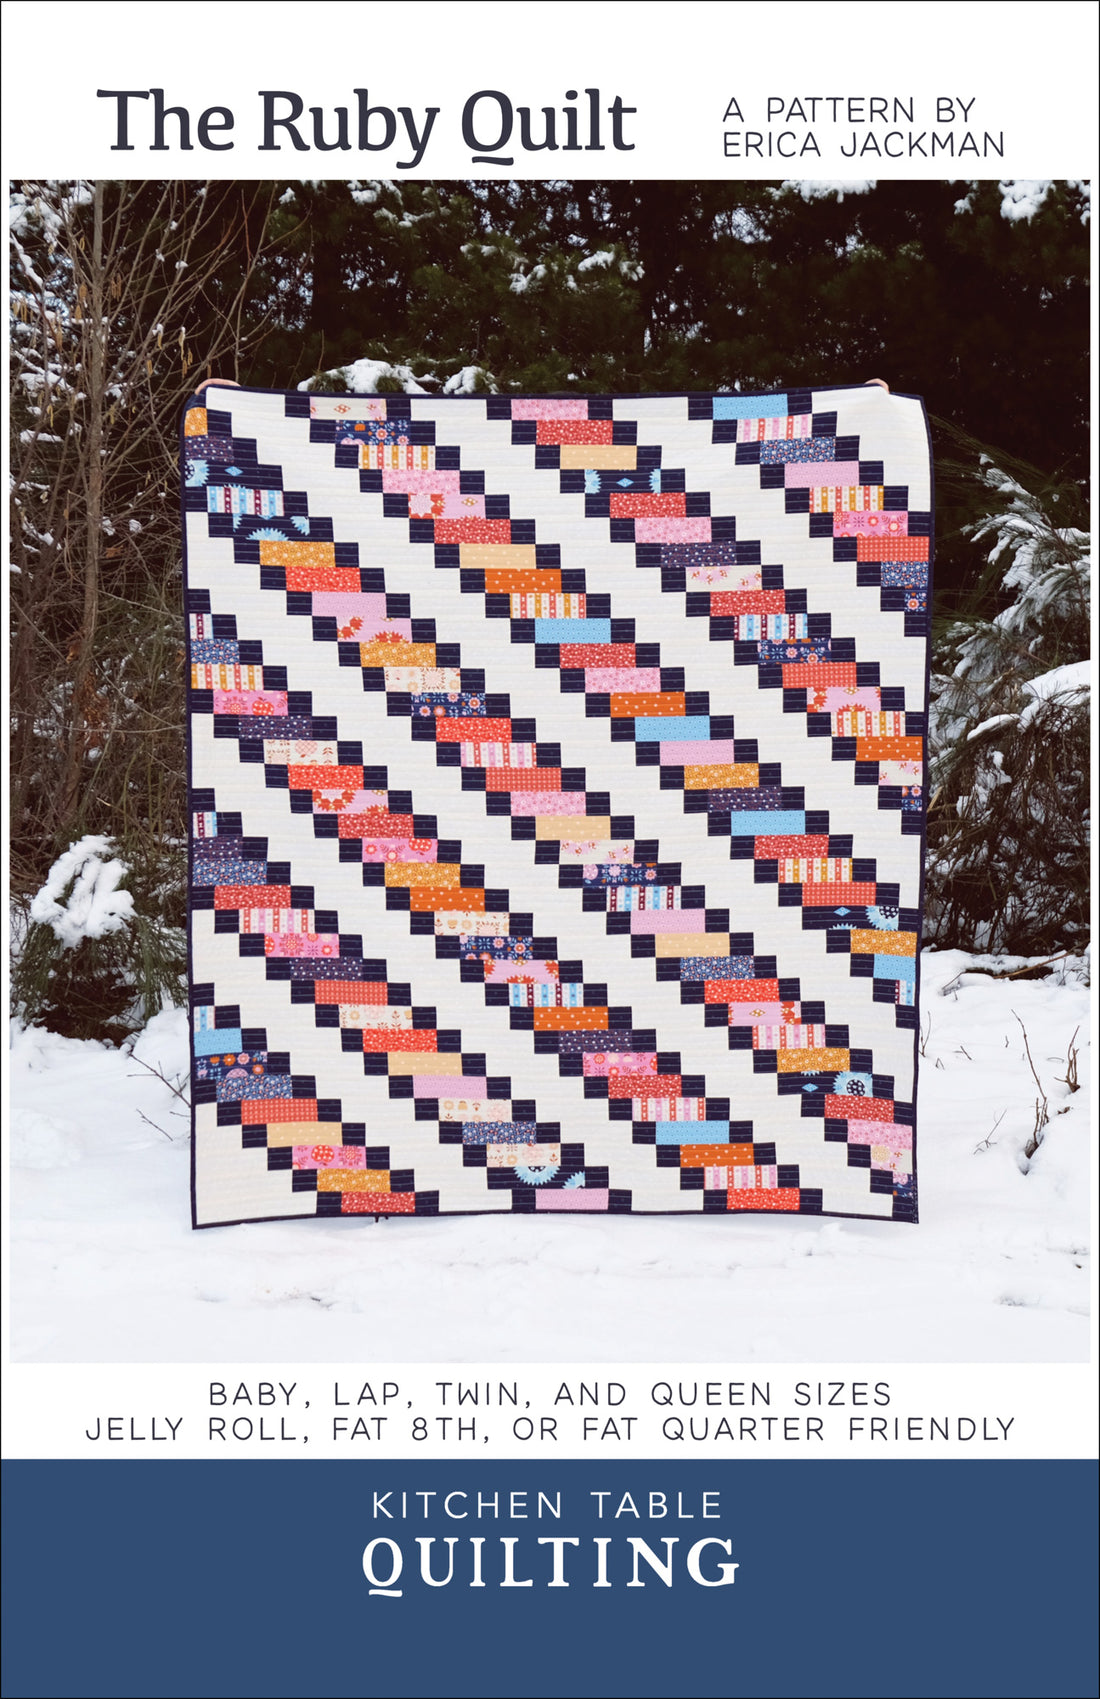 The Ruby Quilt PDF Pattern